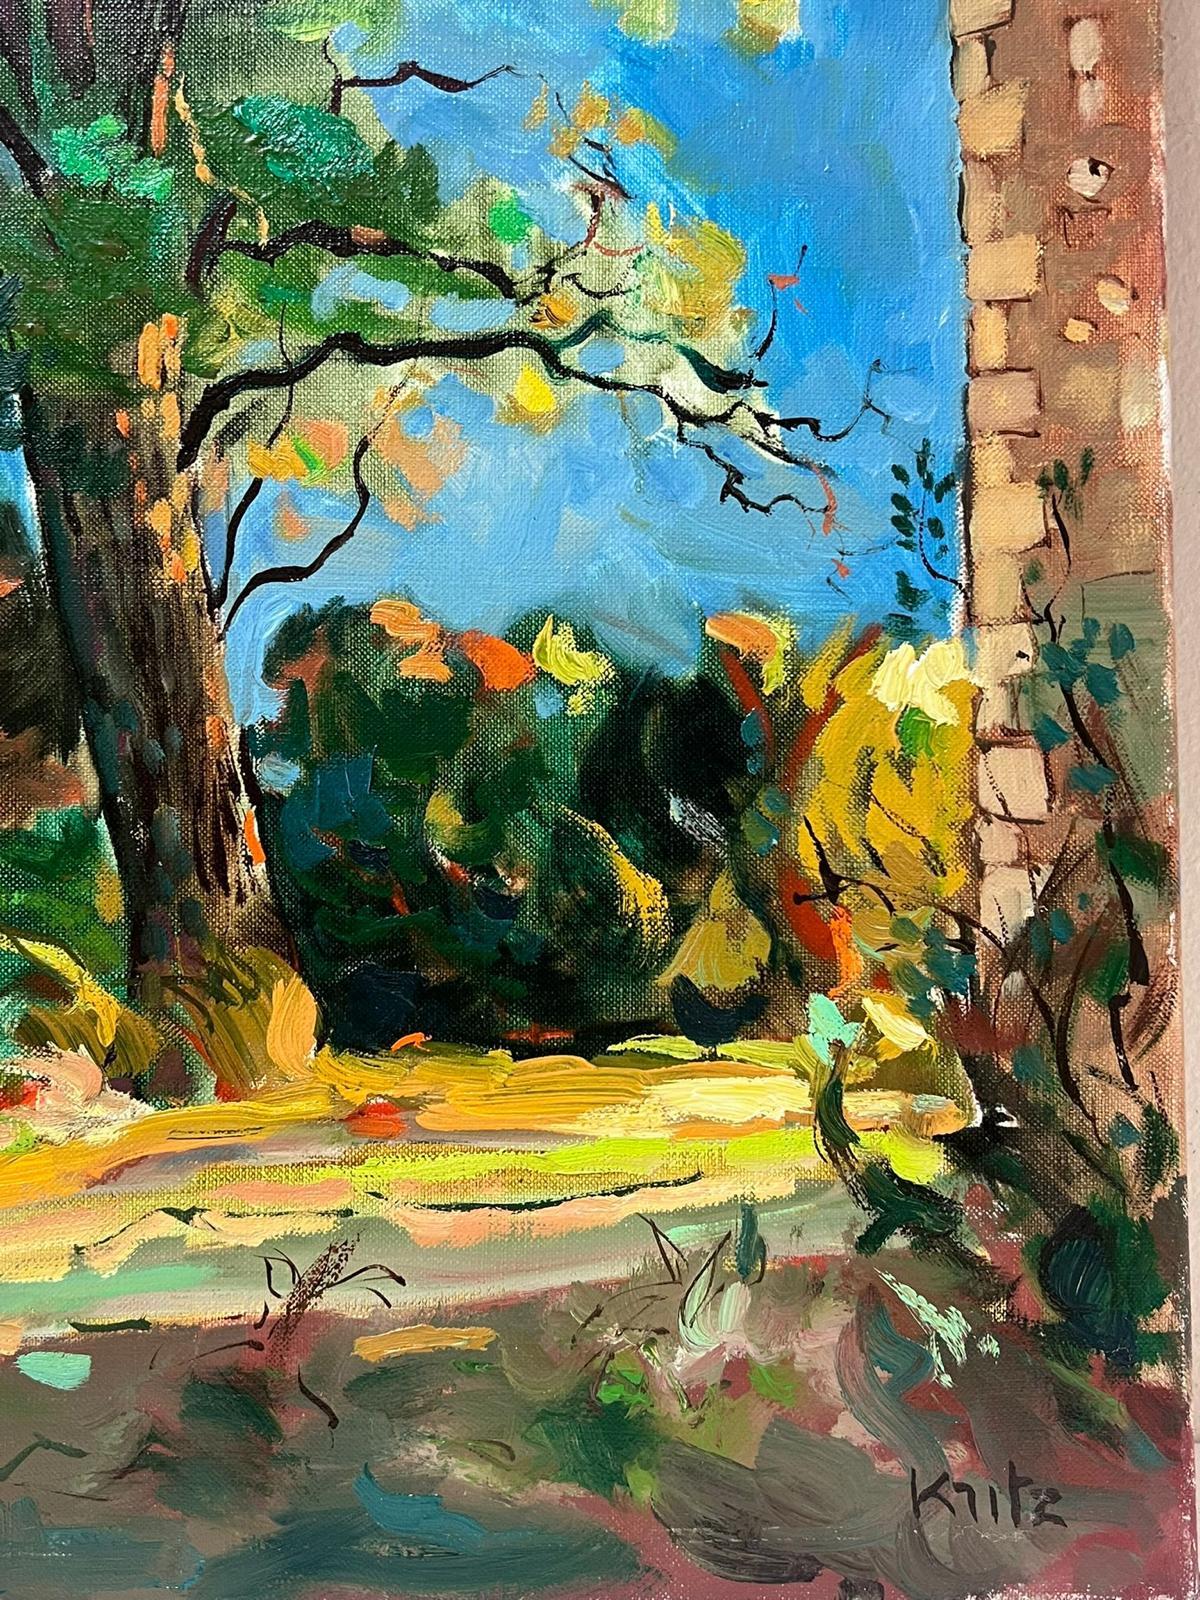 Sun Bathed Tree
by Michel Kritz (French 1925-1994) 
signed oil on canvas, unframed
canvas: 18 x 15 inches
provenance: private collection, France
condition: very good and sound condition  